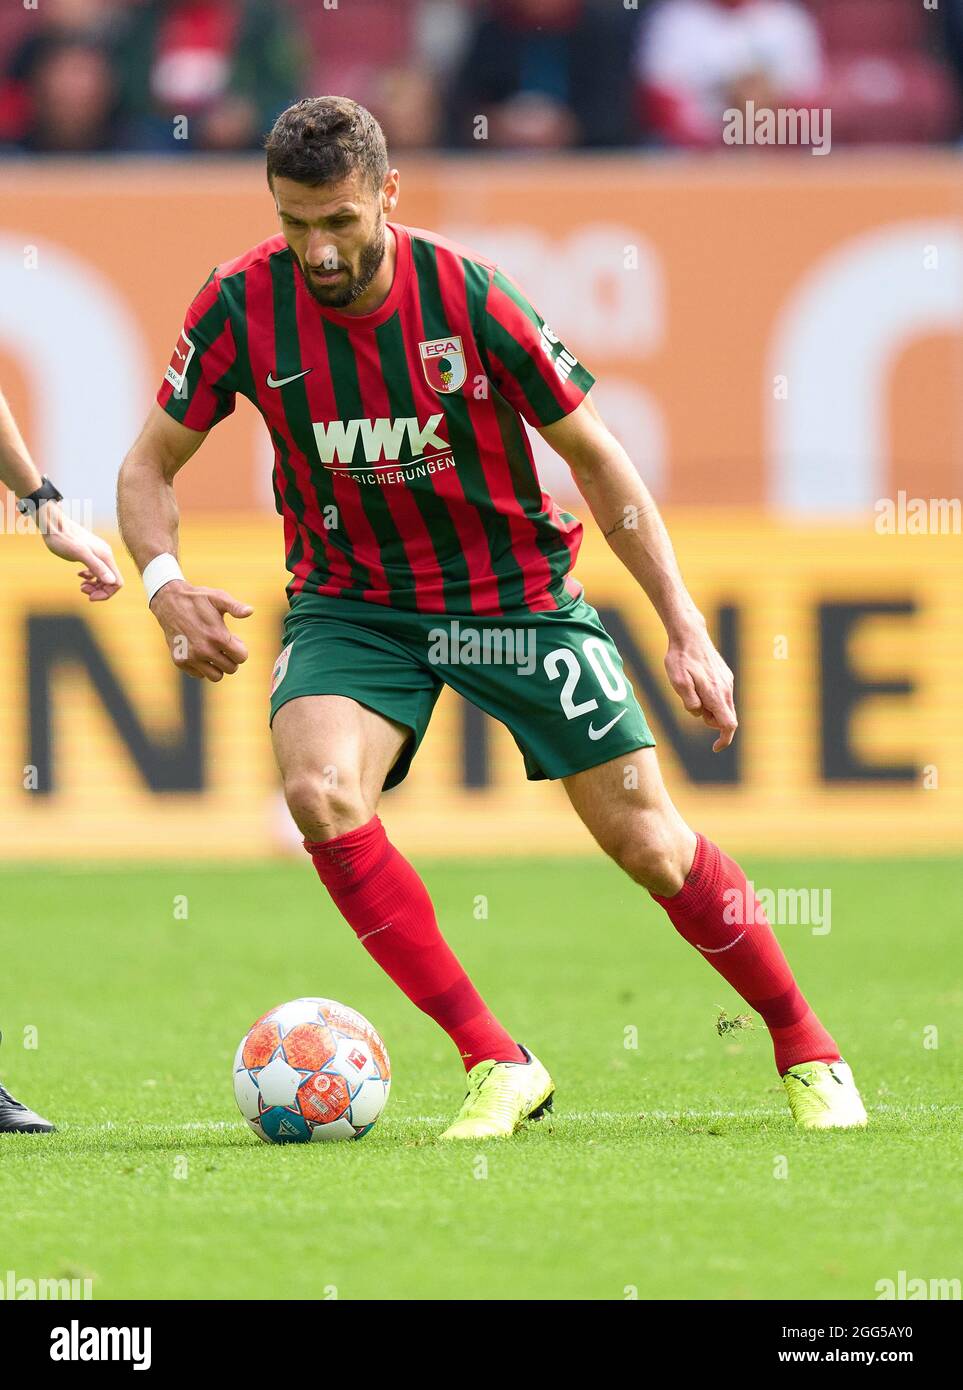 Daniel CALIGIURI, FCA 20  in the match FC AUGSBURG - BAYER 04 LEVERKUSEN 1-4 1.German Football League on August 28, 2021 in Augsburg, Germany  Season 2021/2022, matchday 3, 1.Bundesliga, 3.Spieltag. © Peter Schatz / Alamy Live News    - DFL REGULATIONS PROHIBIT ANY USE OF PHOTOGRAPHS as IMAGE SEQUENCES and/or QUASI-VIDEO - Stock Photo